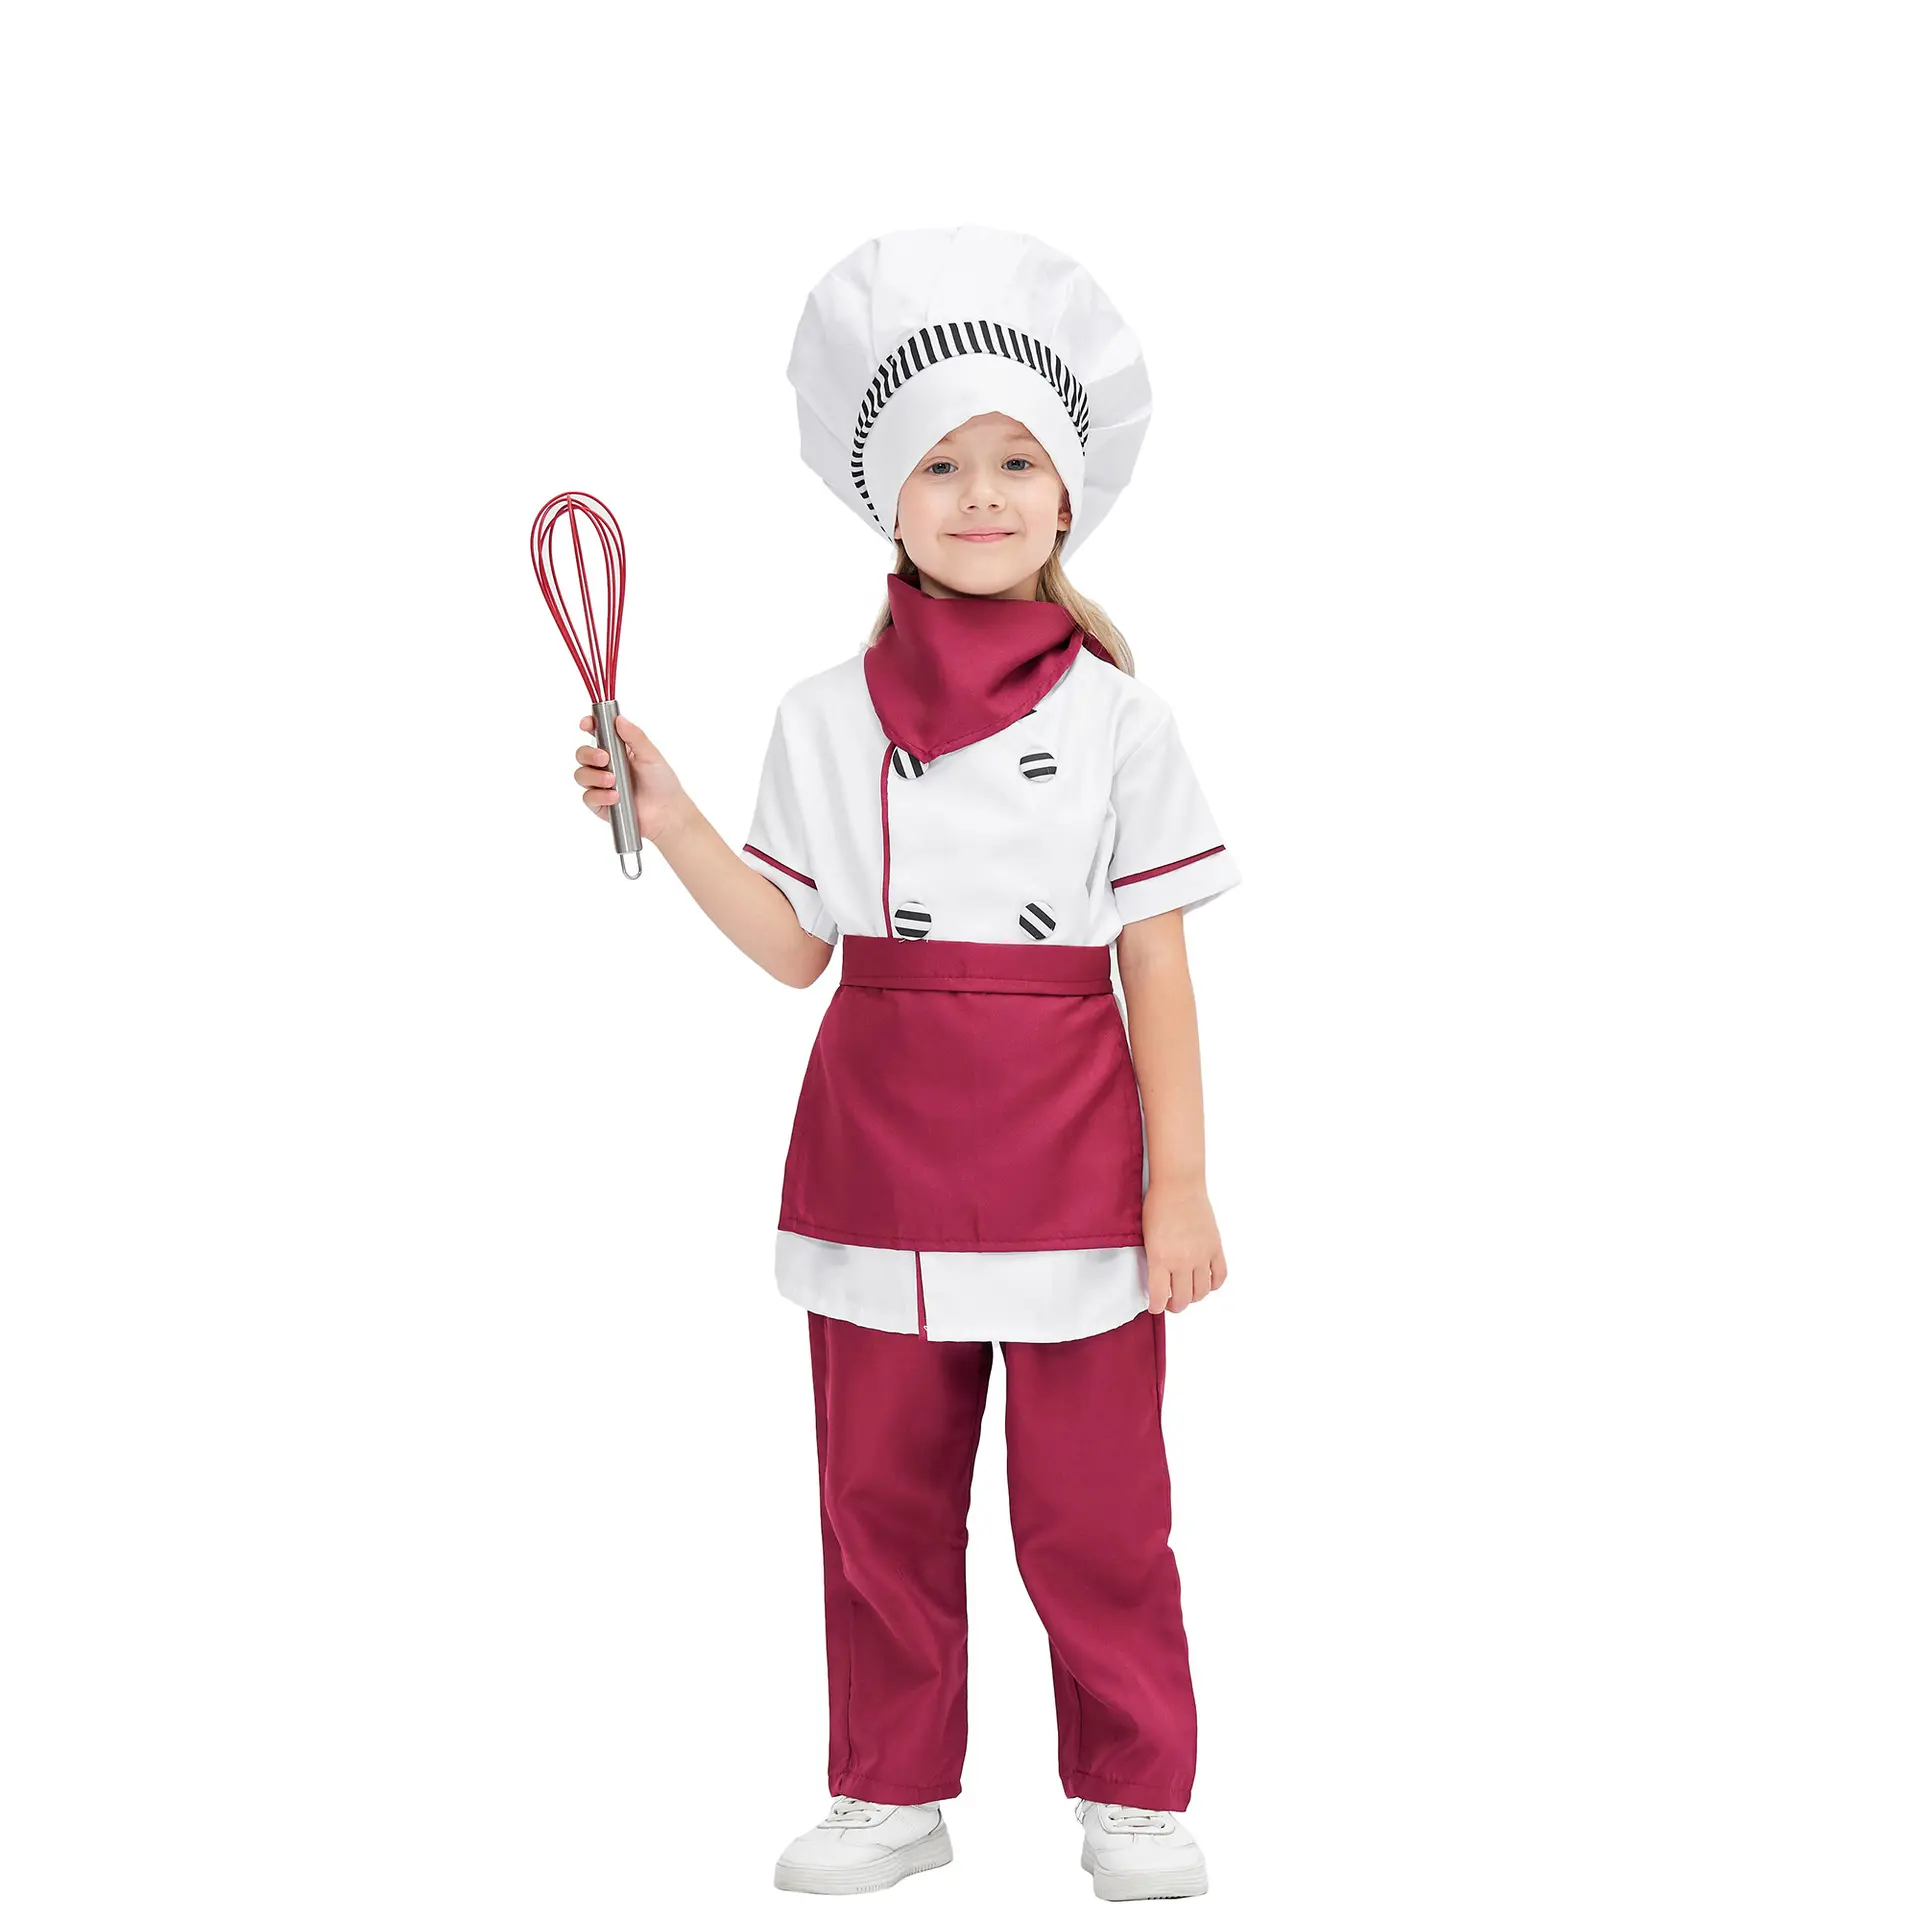 Kids Boys Girls Role Play Party Costume Chef Cosplay Costume